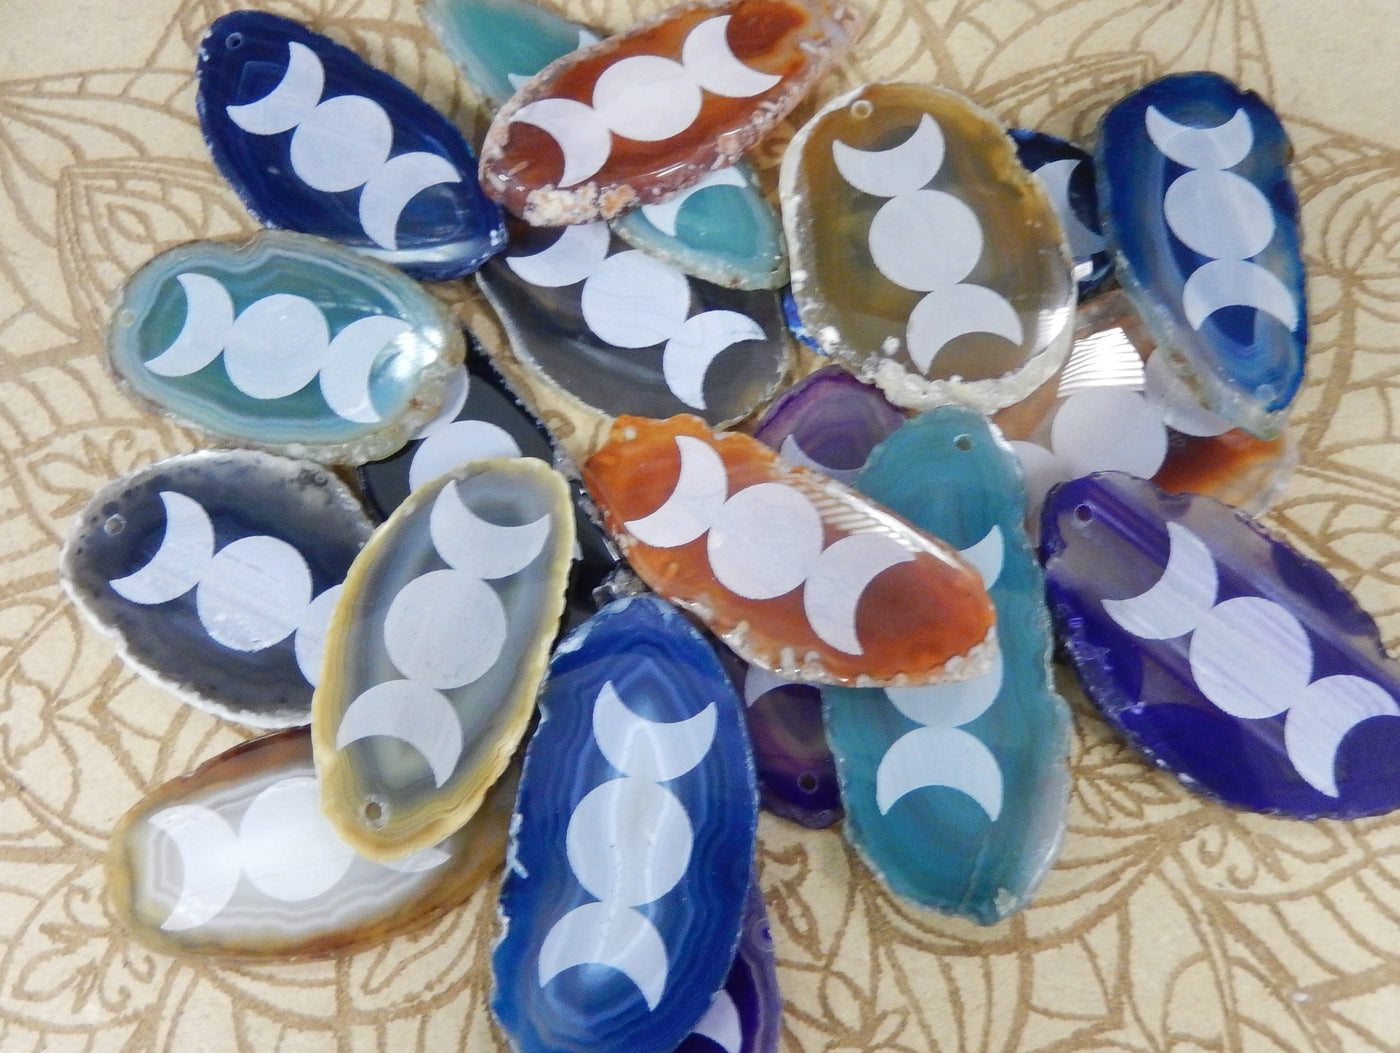 This picture is showing all the variety of colors we have available for our agate slice with large moon design.